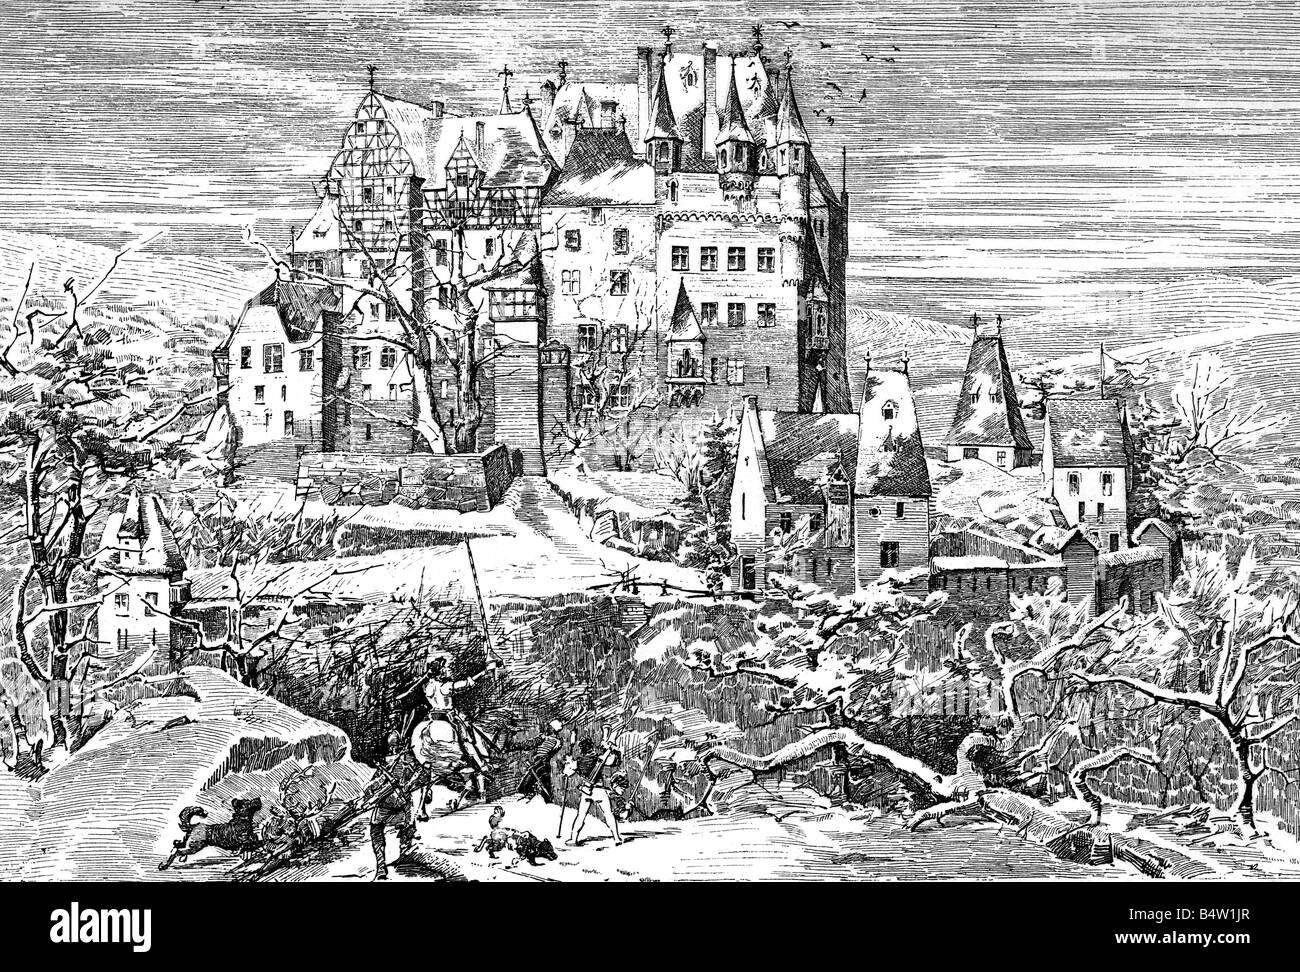 architectur, castles, Germany, Rhineland-Palatinate, Eltz Castle, exterior view in the middel ages, wood engraving, late 19th century, winter, snow, historic, historical, Rhineland - Palatinate, medieval, middle ages, people, Stock Photo